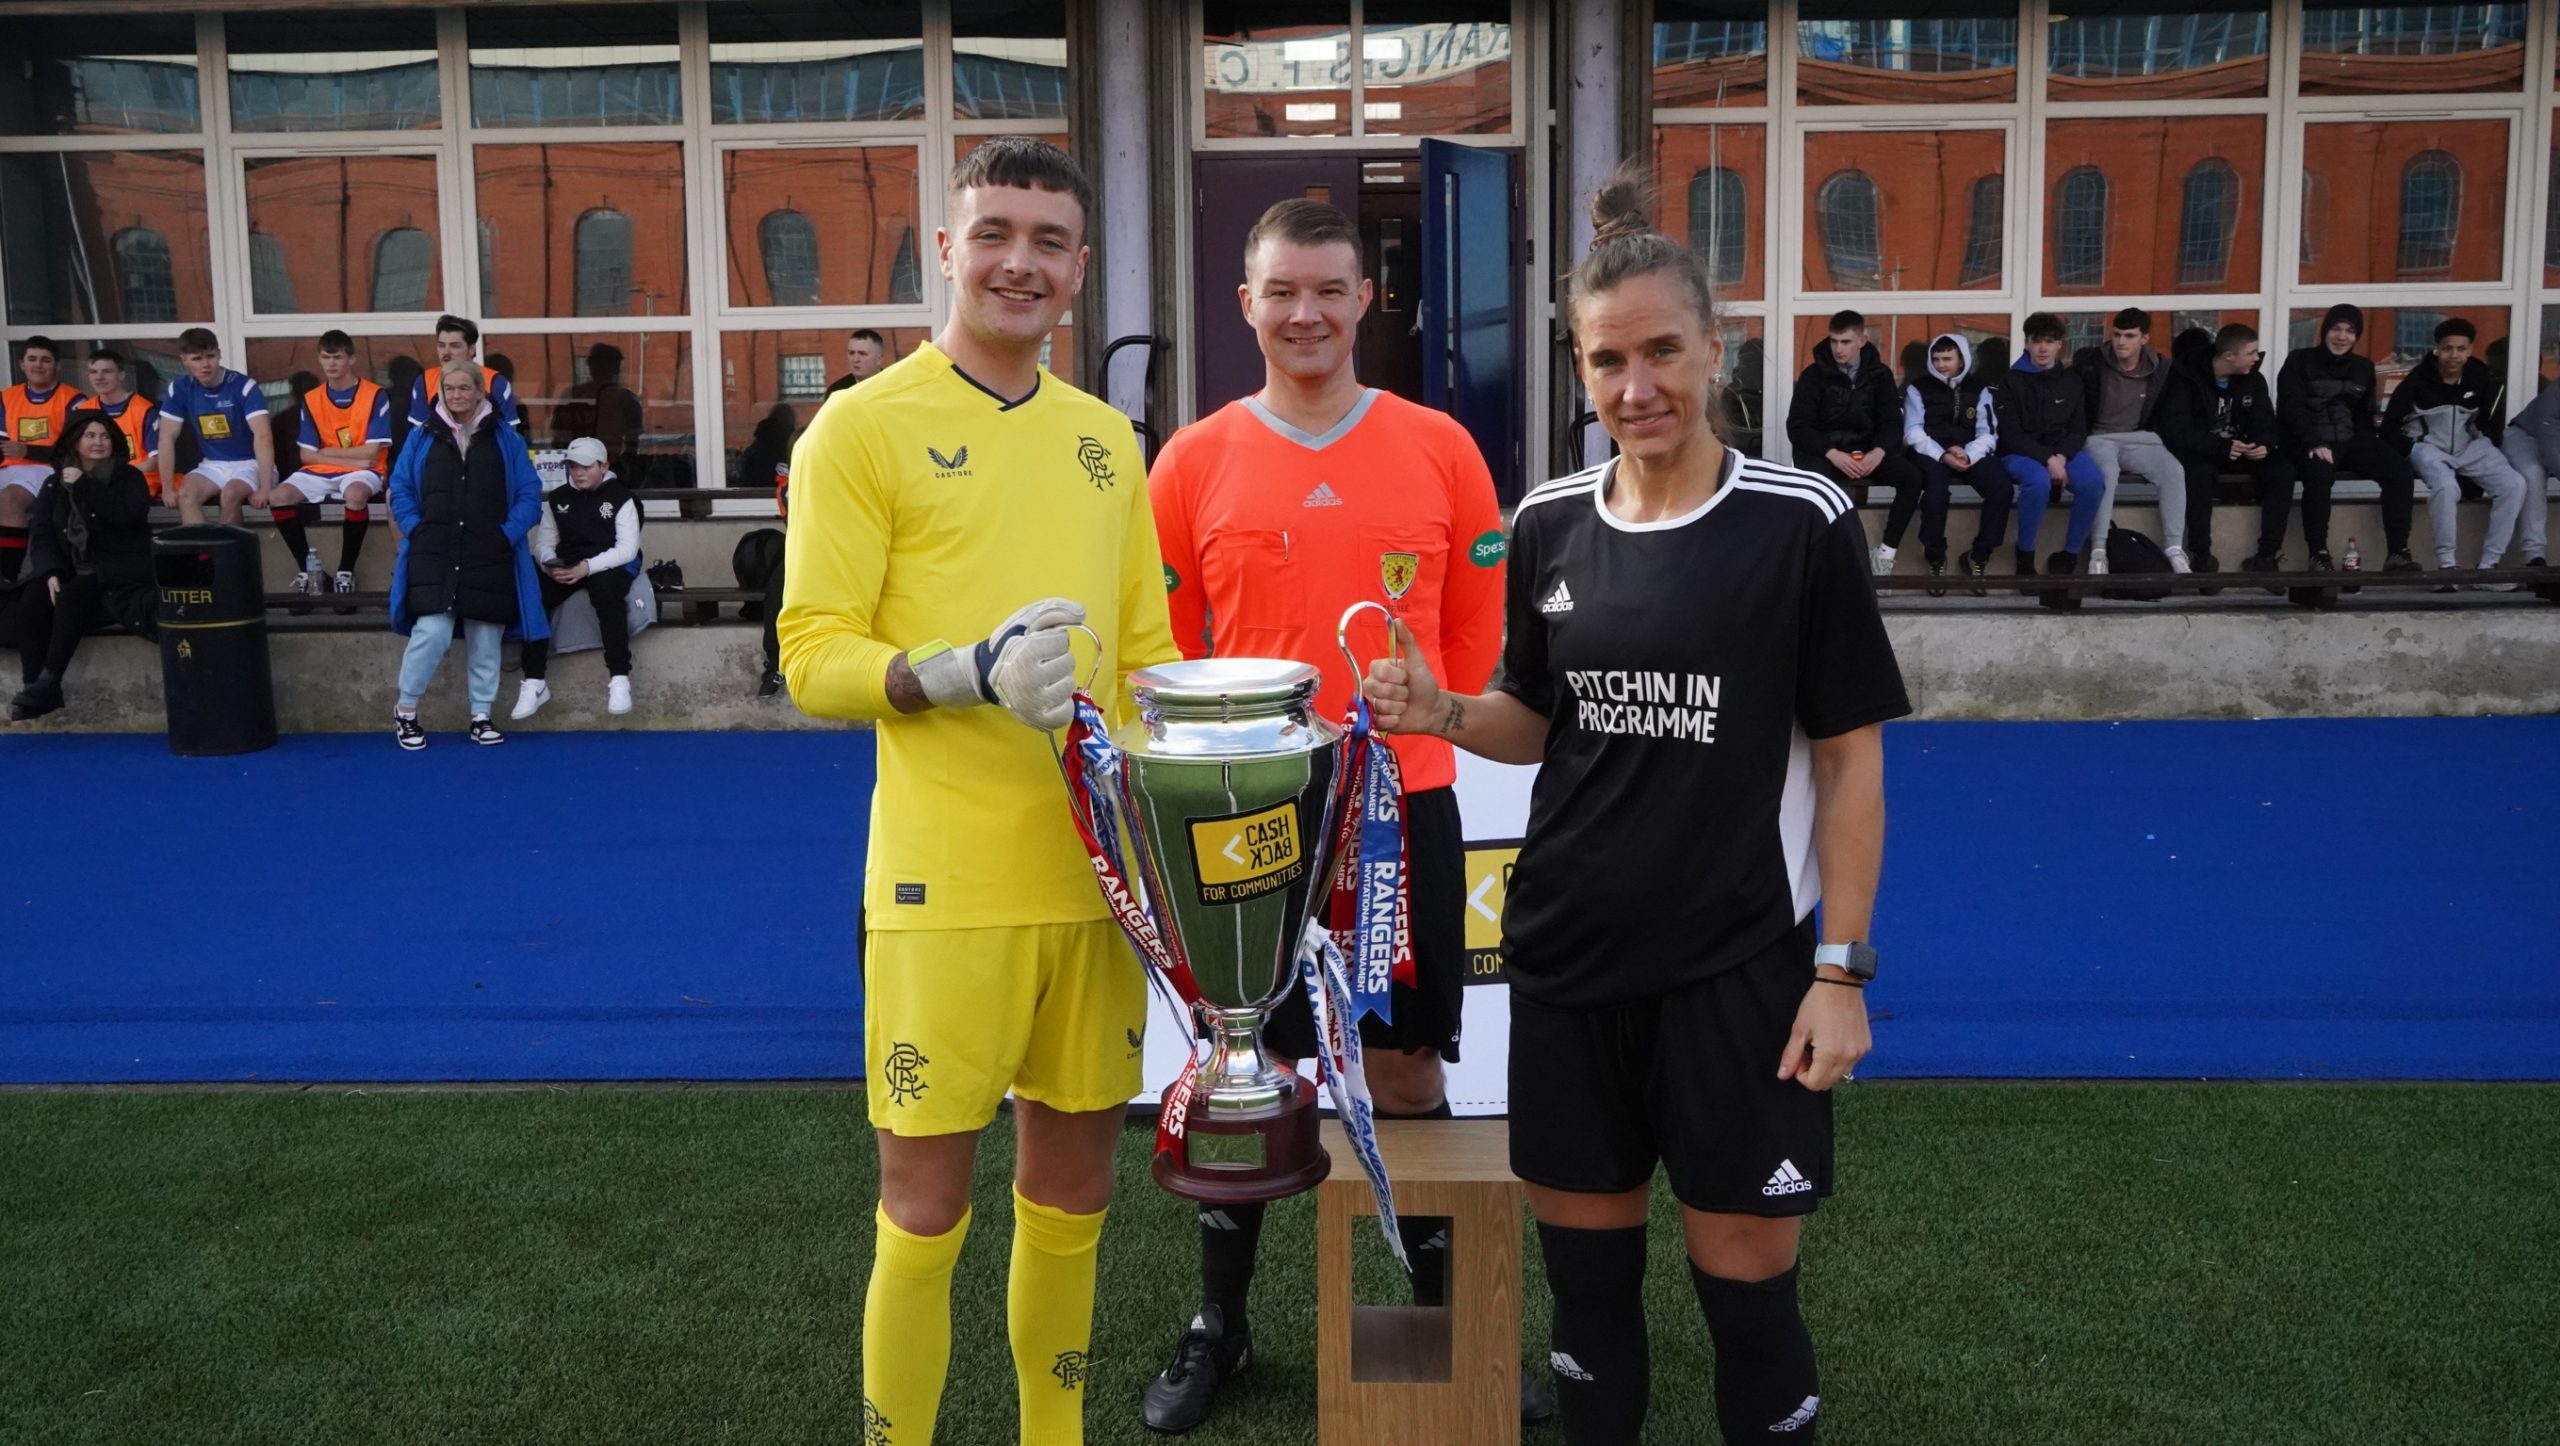 Three people standing holding a trophy